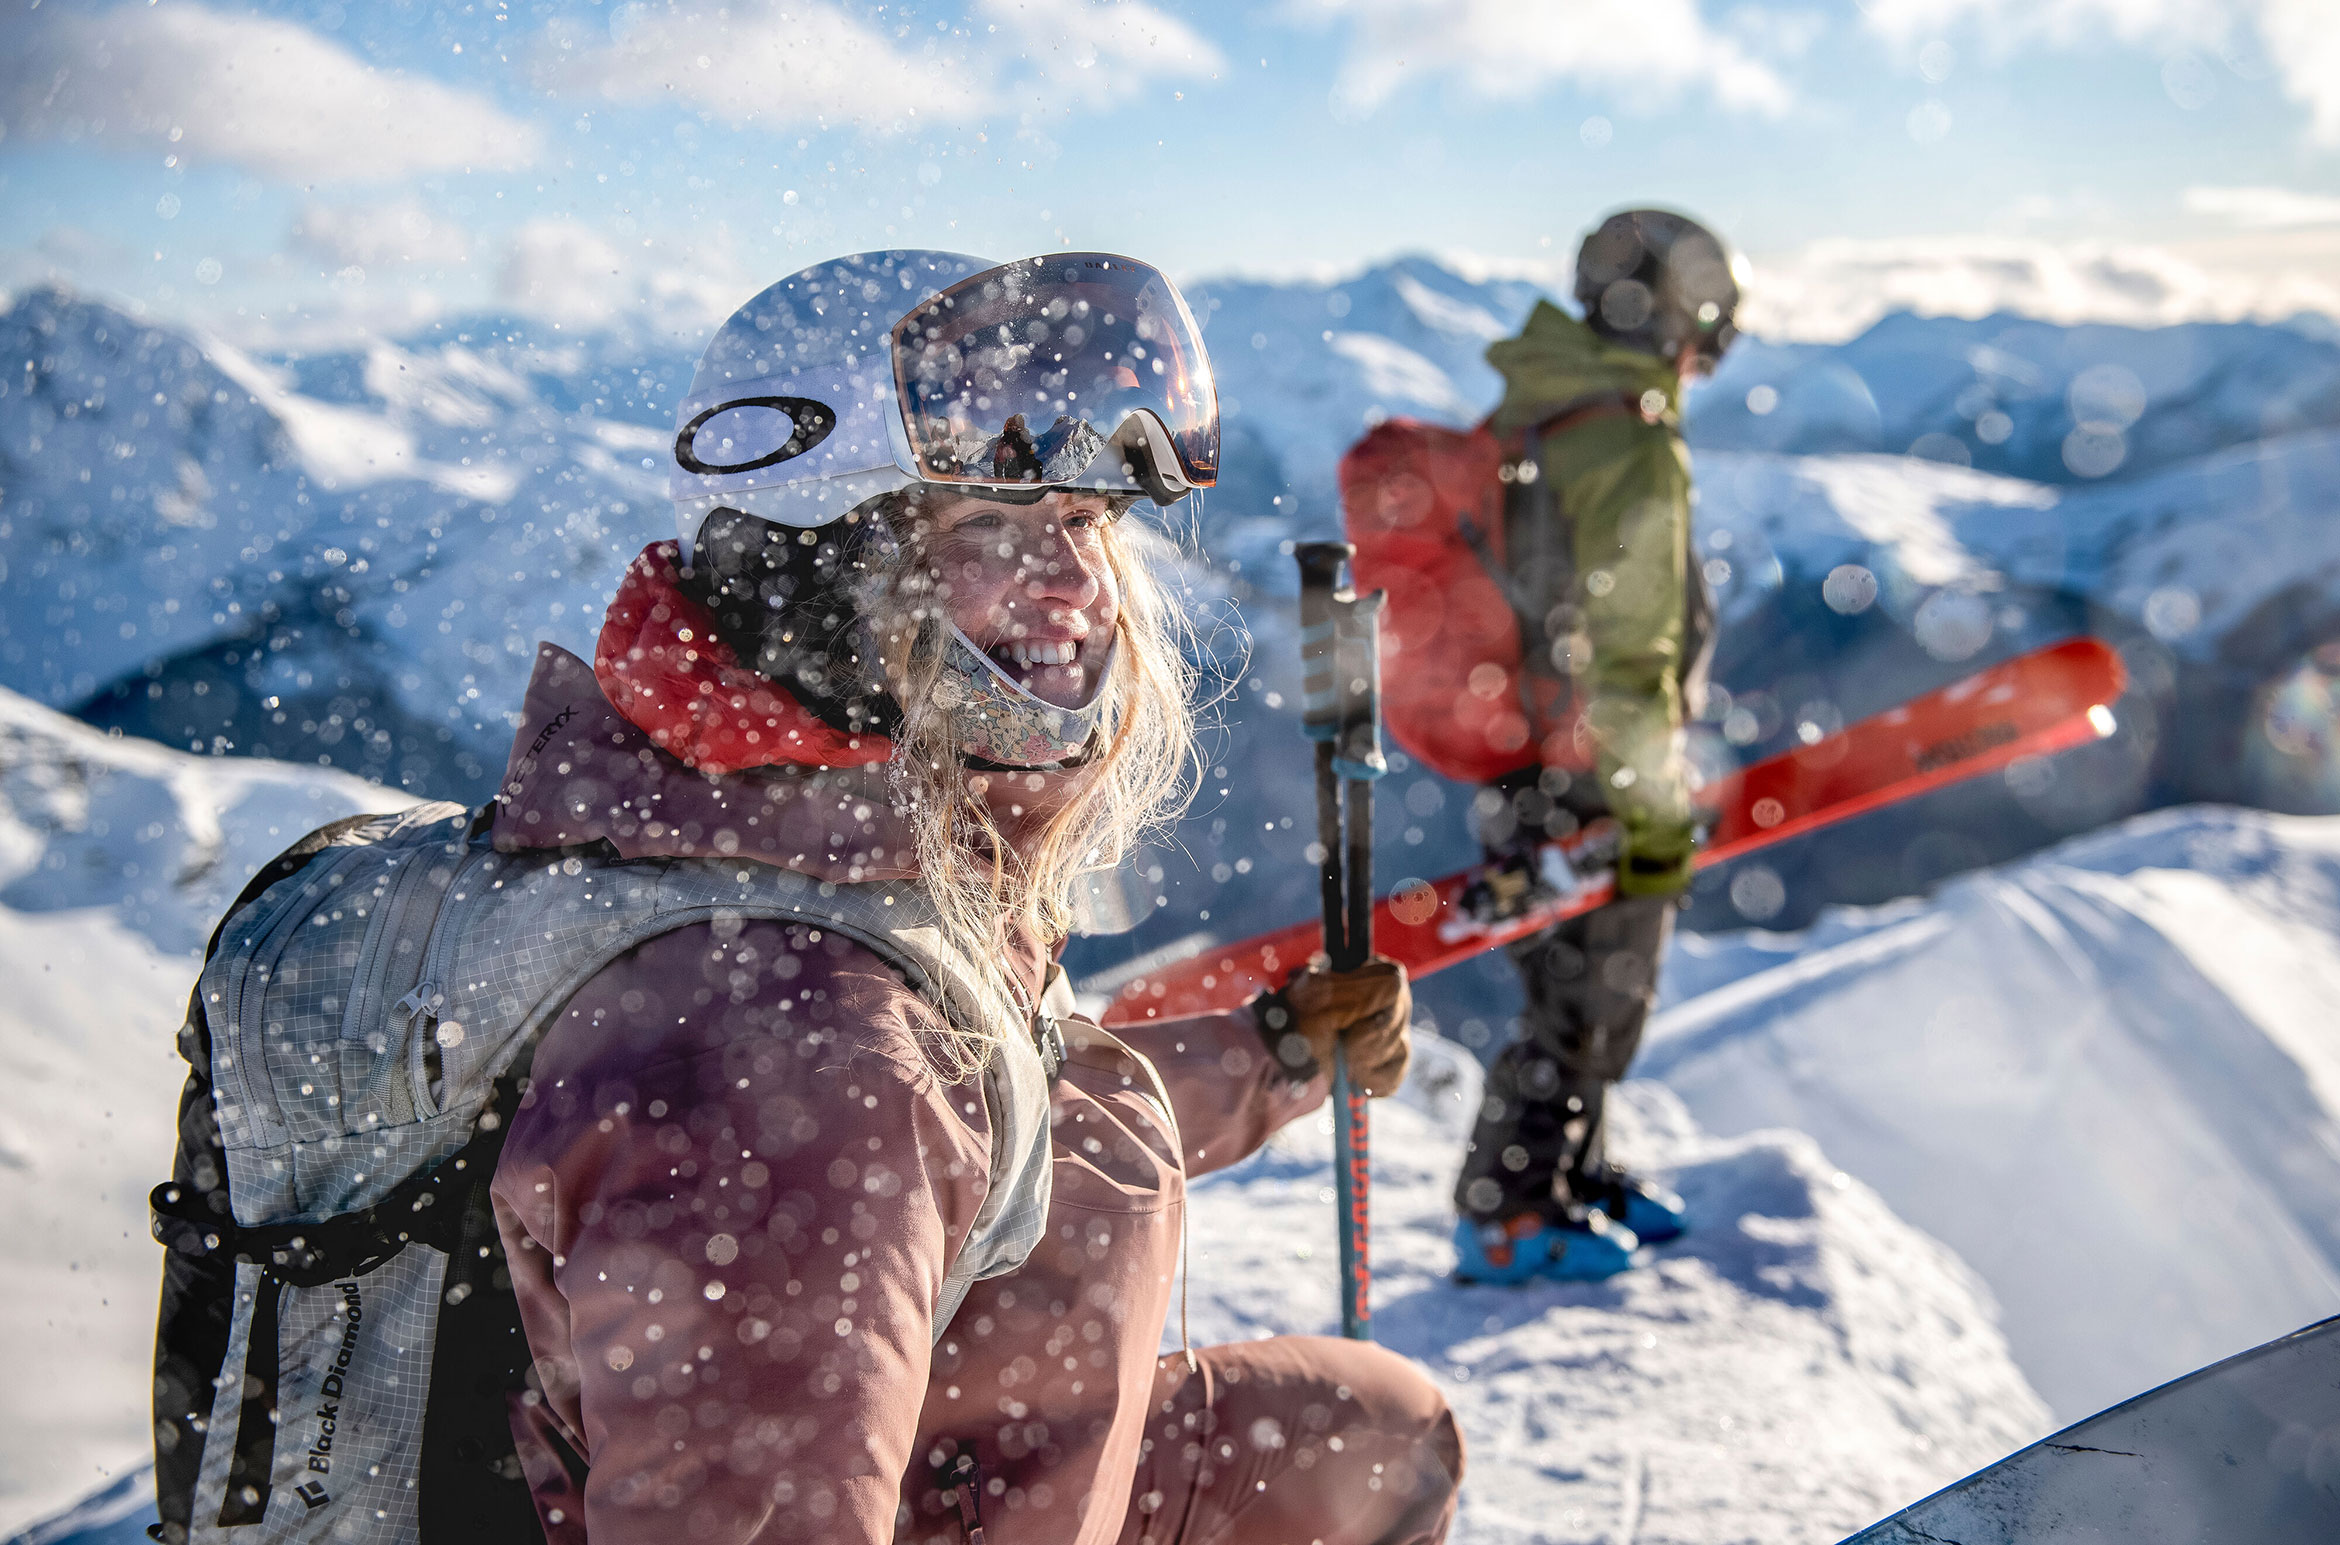 Local Tips for a Winter Whistler Ski Trip to